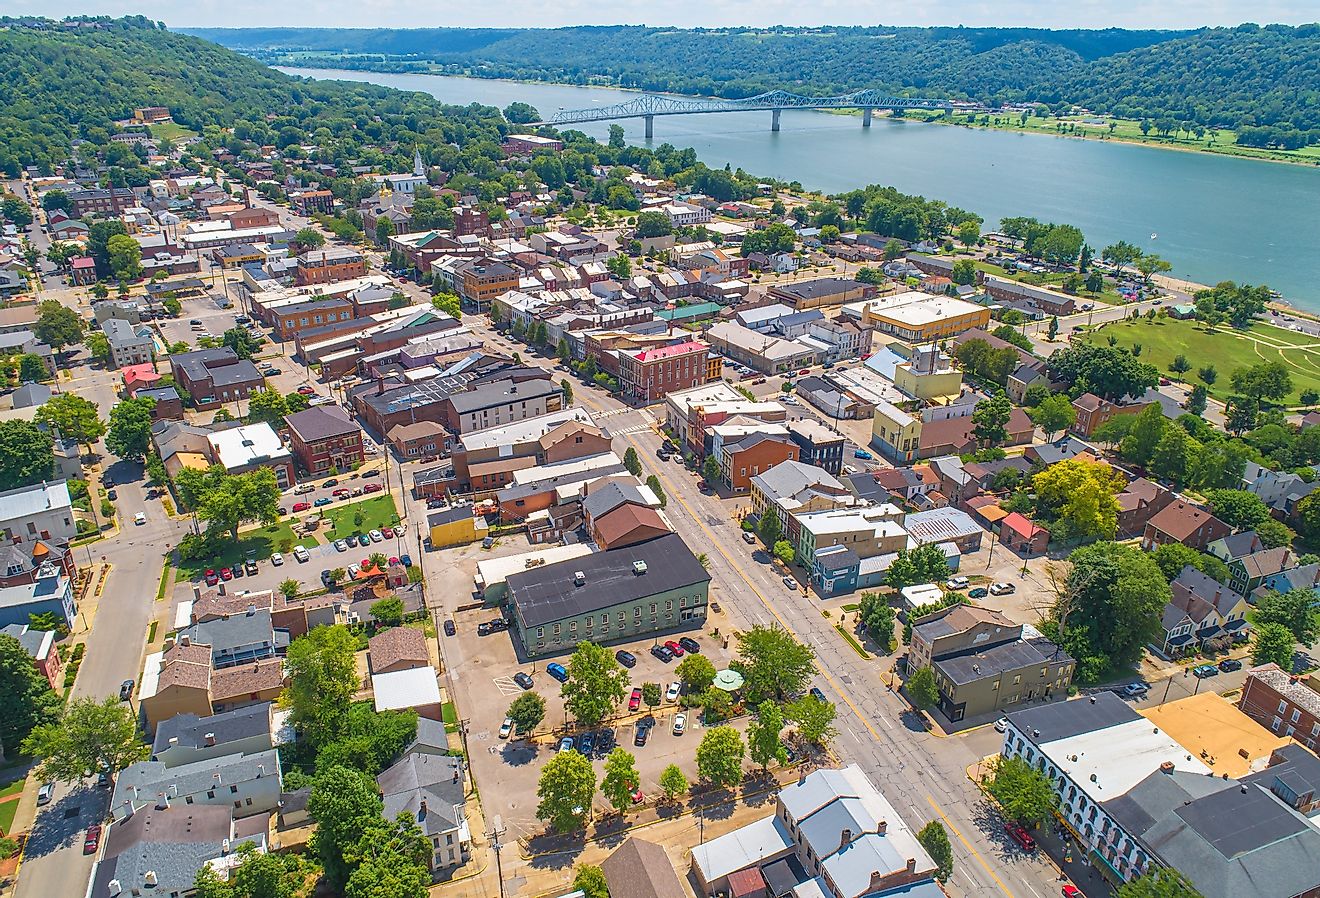 Aerial view of historic Madison, Indiana on the Ohio River. Image credit Aaron via AdobeStock.